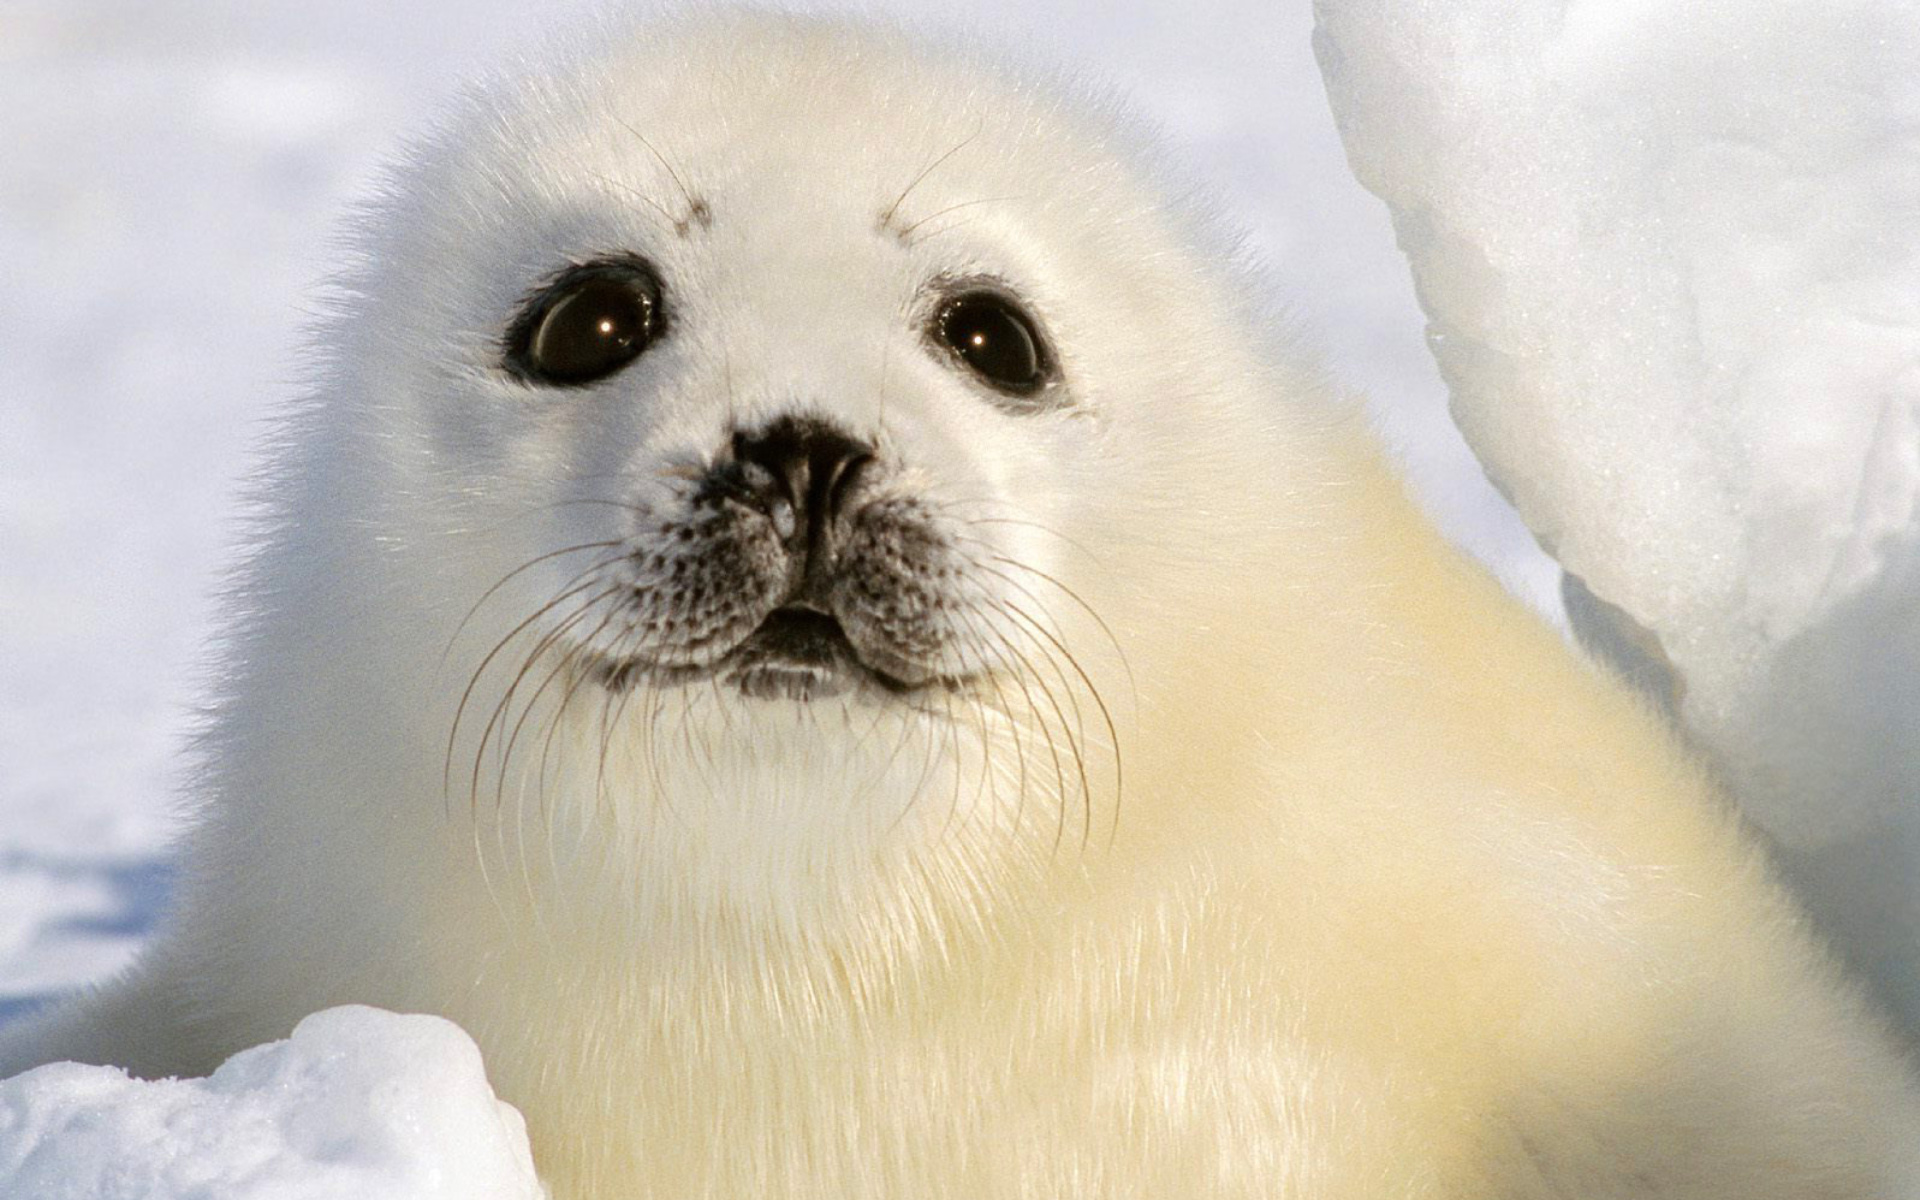 Gallery For Gt Baby Seal Wallpaper